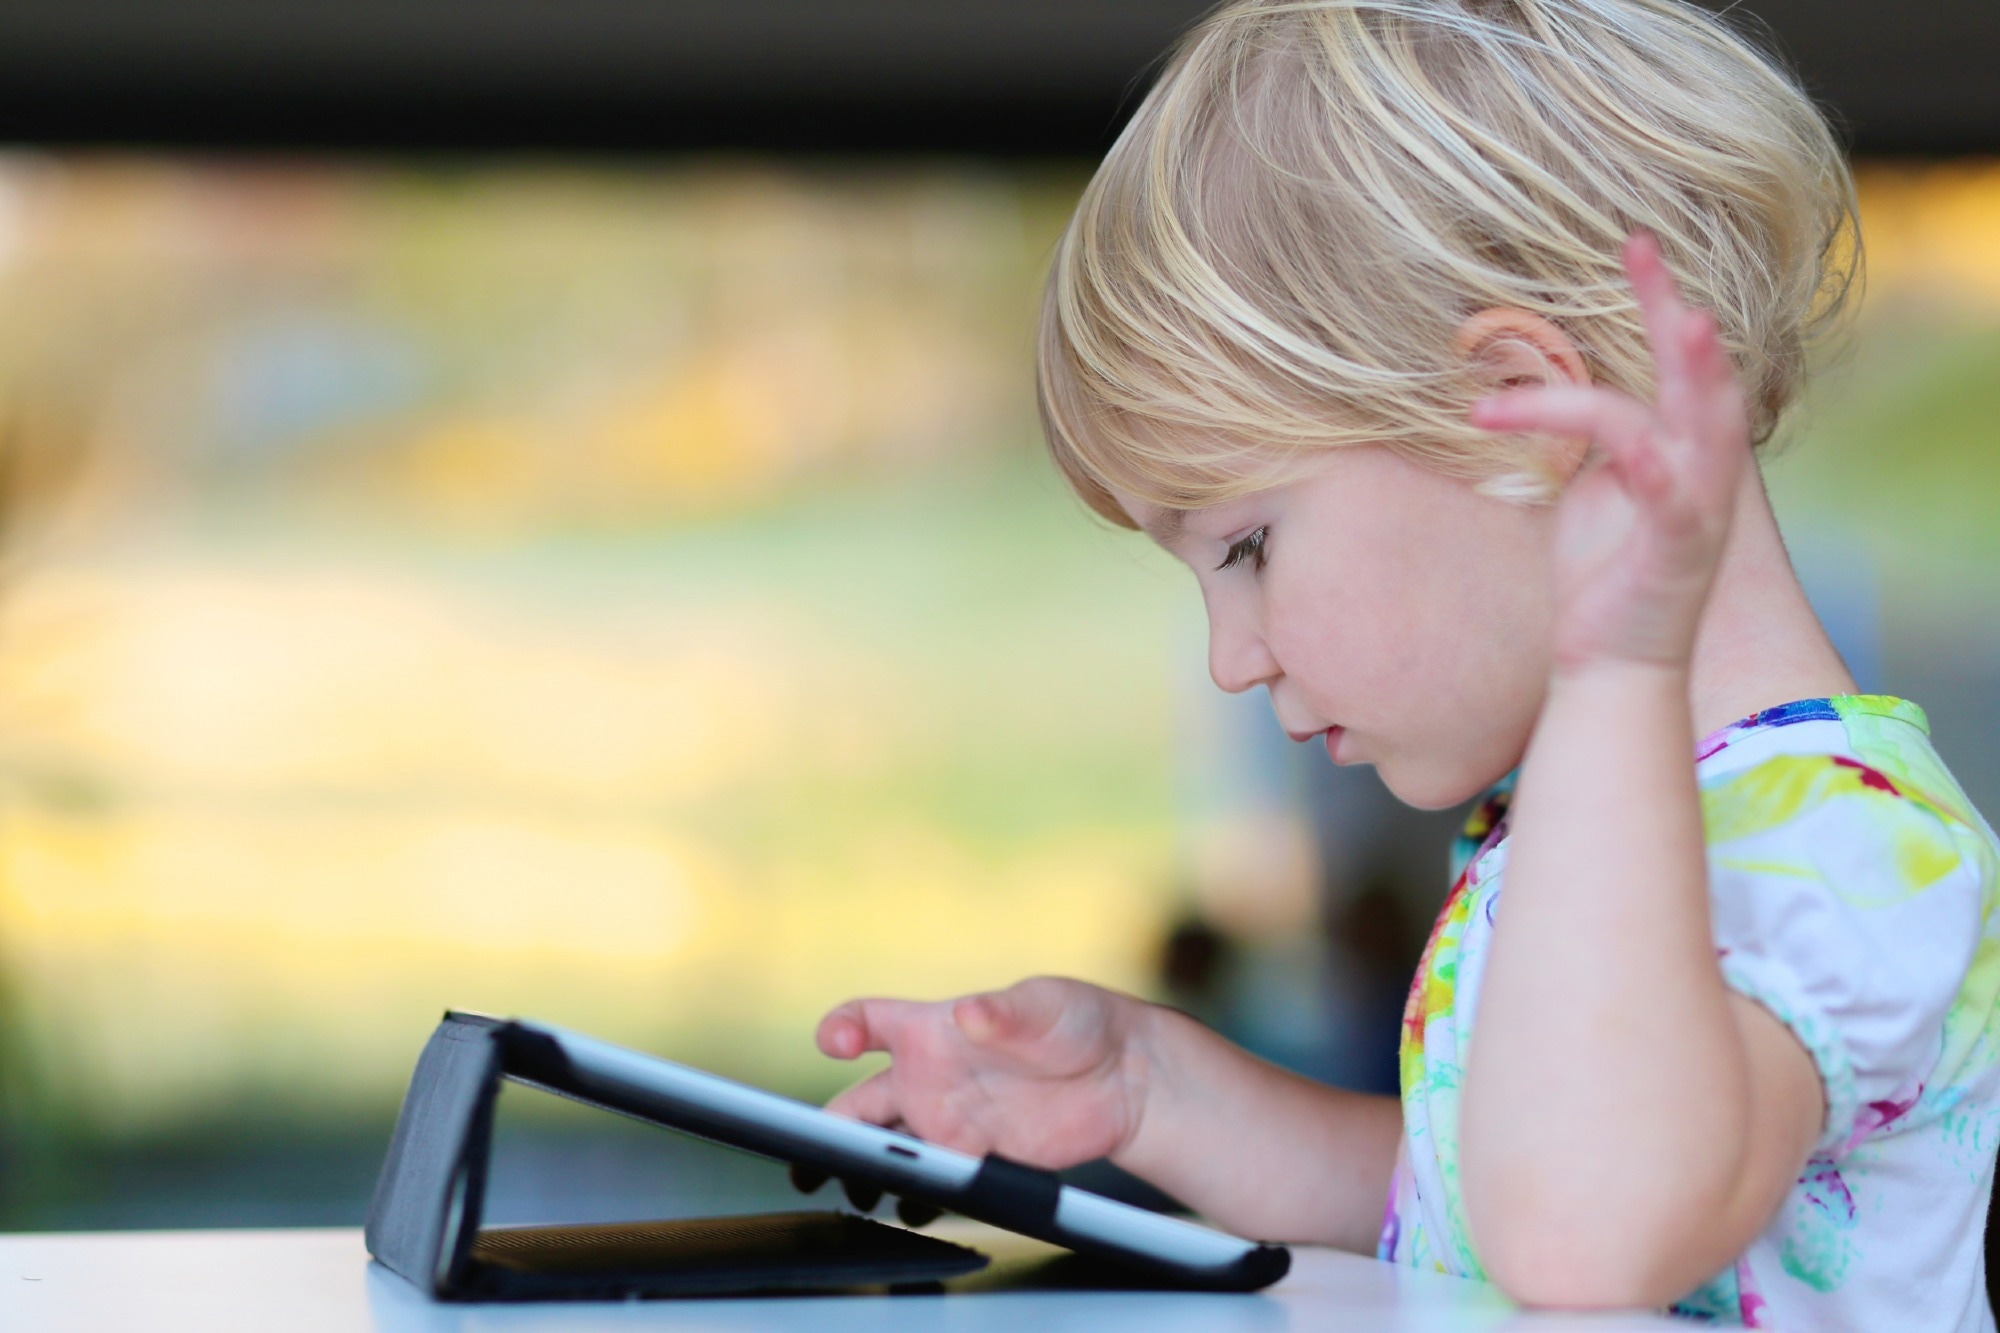 Study: Correlates of Screen Time in the Early Years (0-5 years): A systematic review. Image Credit: CroMary/Shutterstock.com